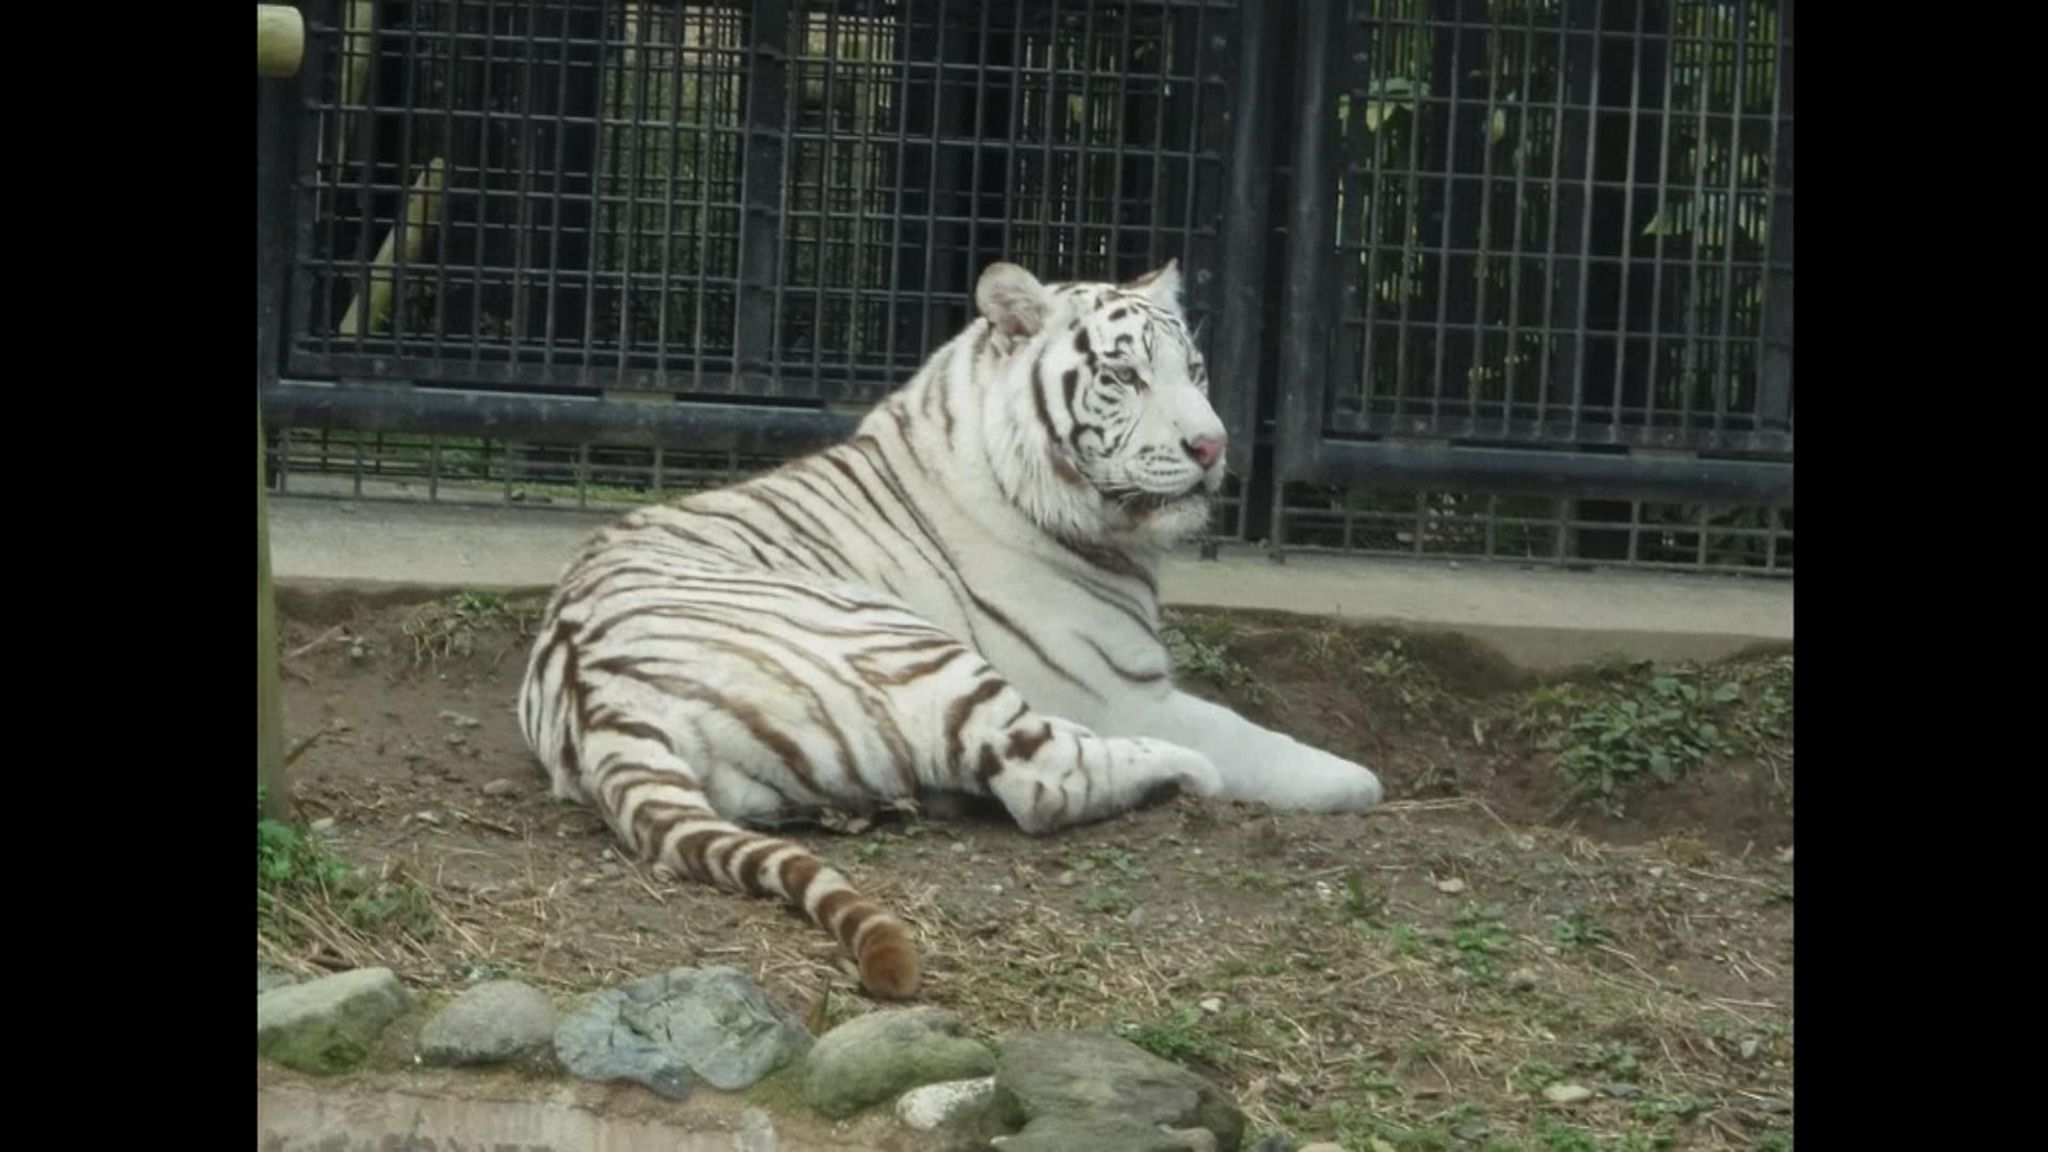 Rare white tigers debut in Japan